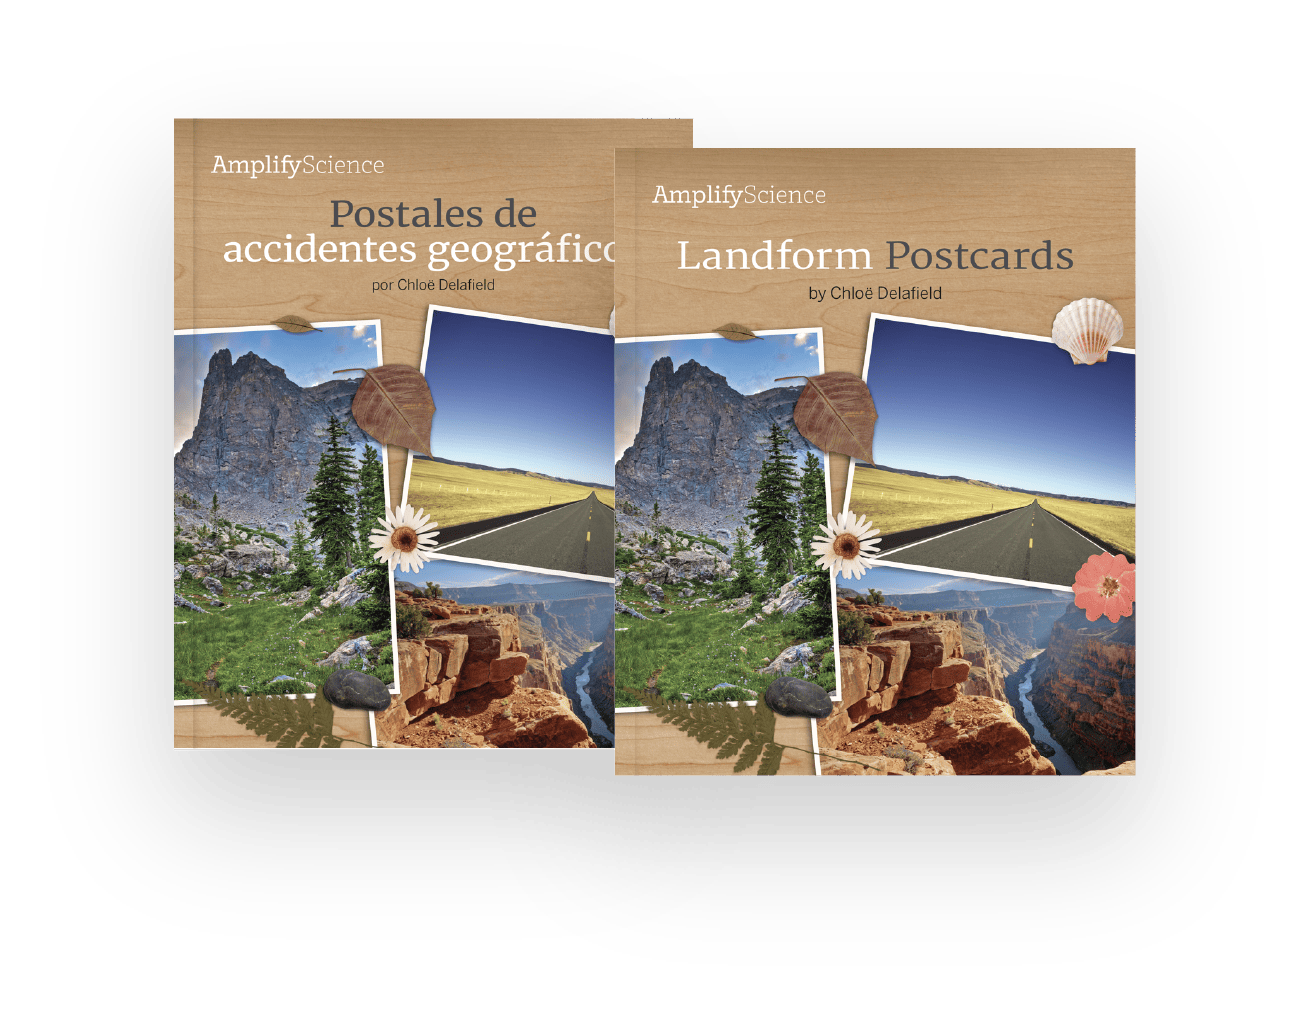 Two educational postcards depicting landforms, titled 